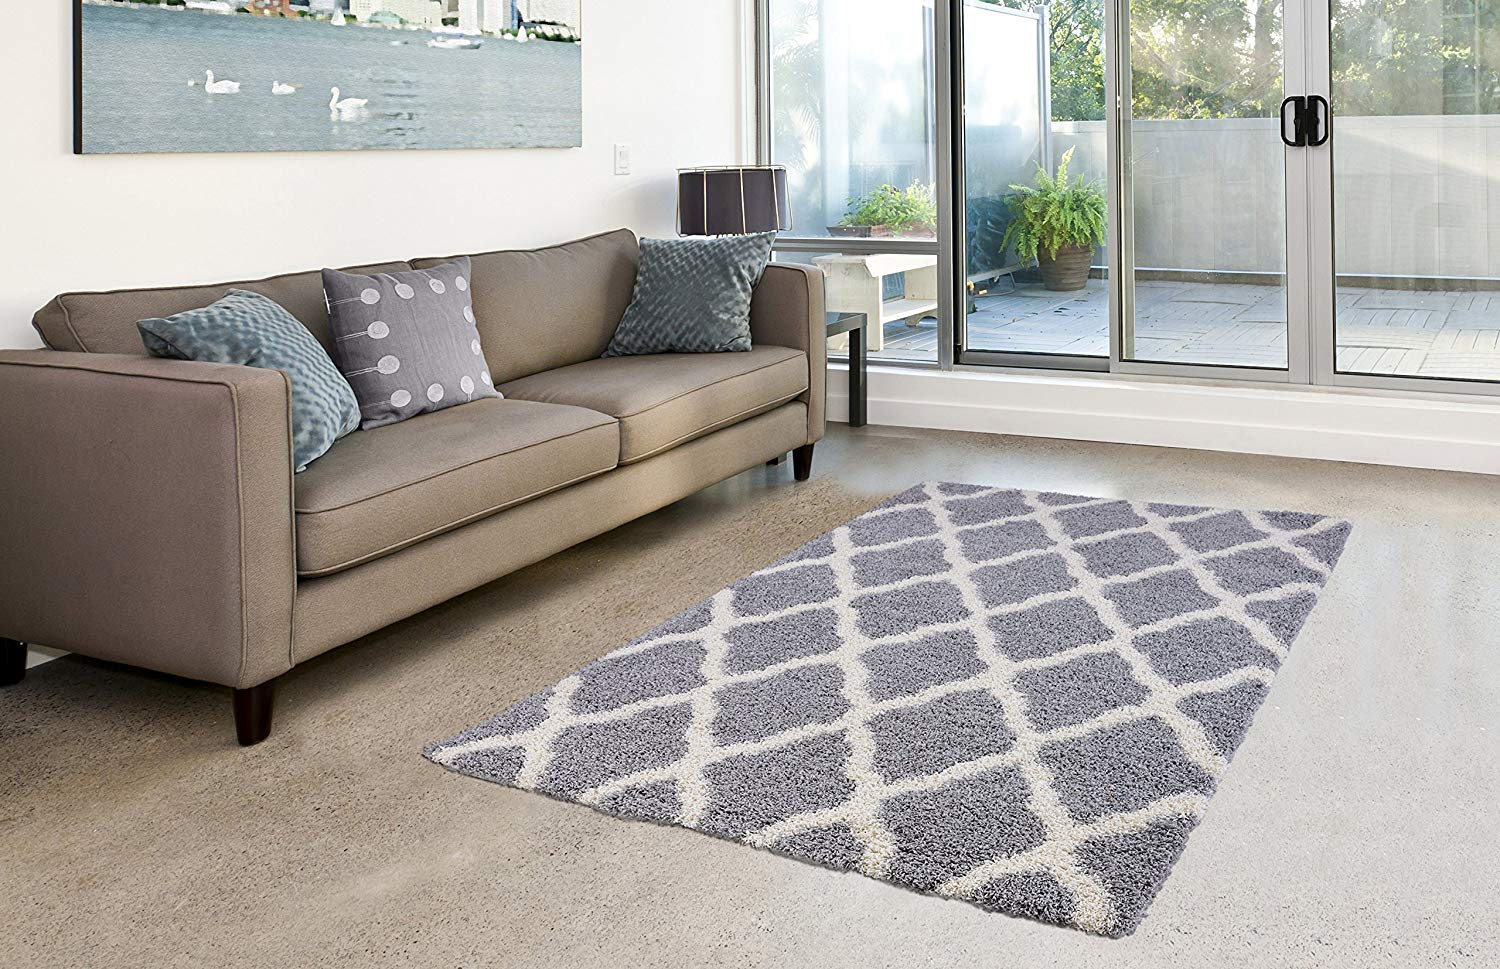 area rugs 8x10 area rug 5x7 5x8 blue luxury bedroom 8x10 clearance living room vintage gray grey traditional bohemian kitchen rugs for bedroom living room abstract rugs area patterns oriental accent rugs contemporary 5'